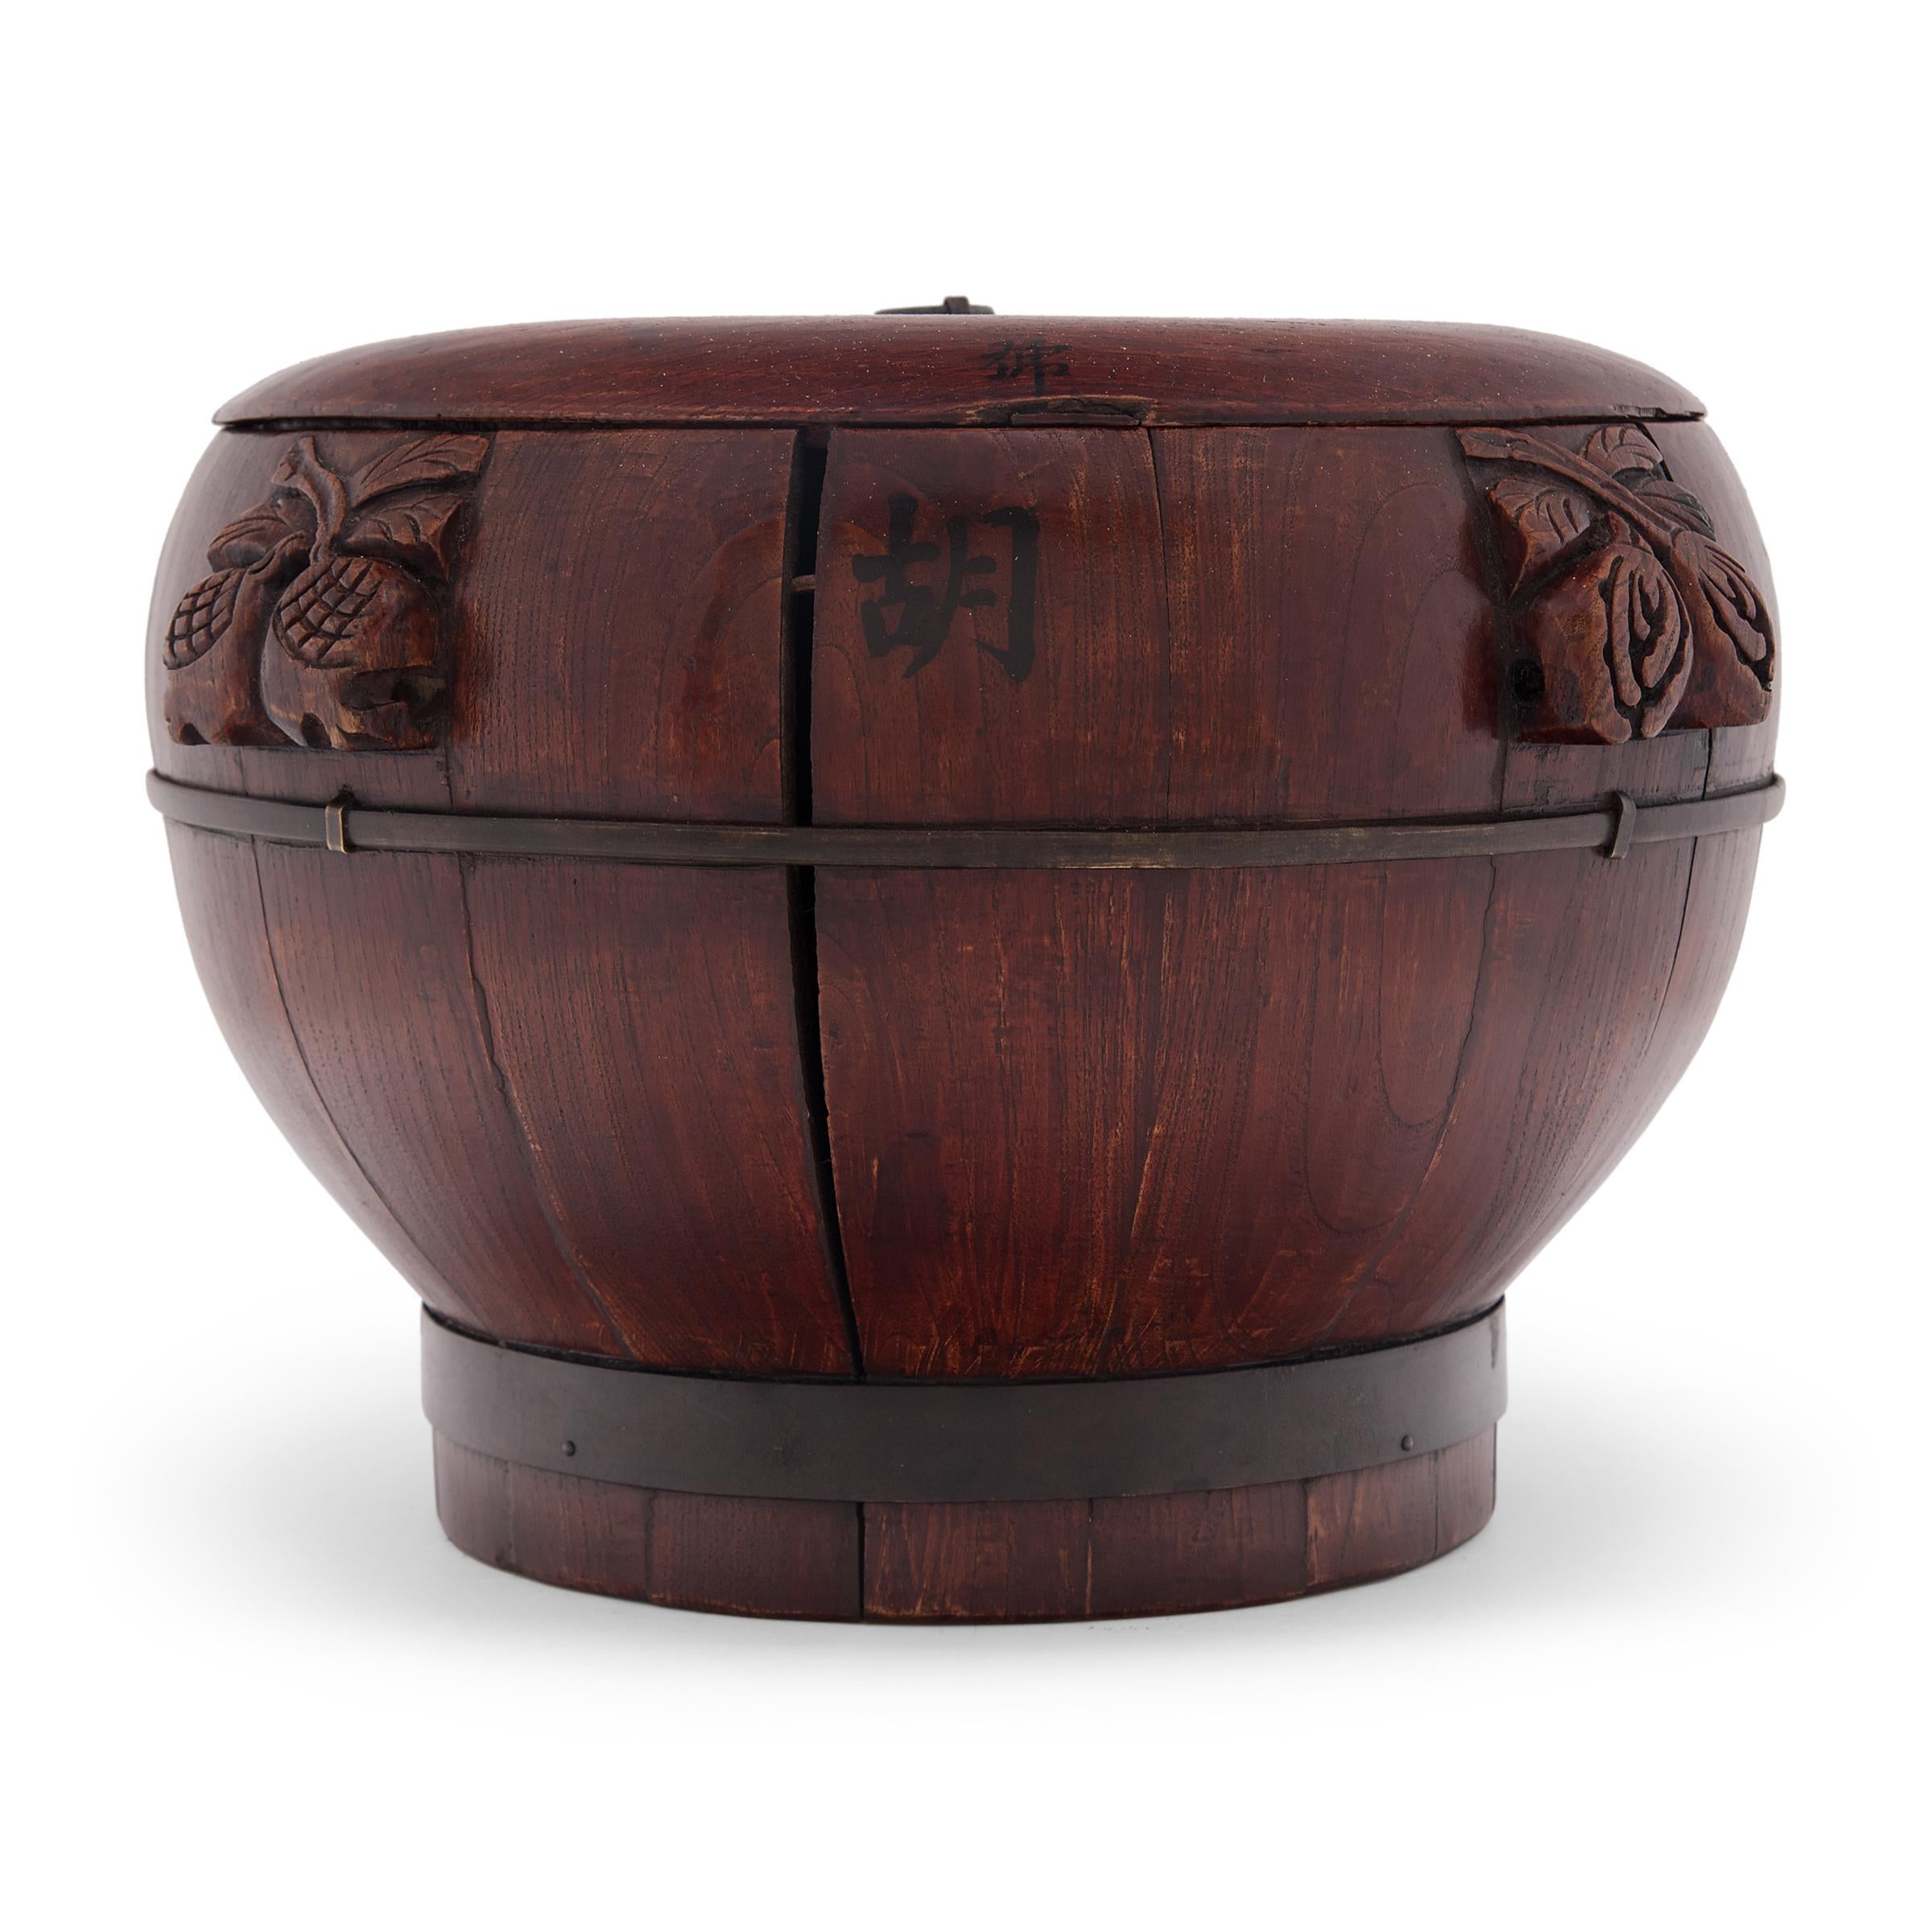 This hand-crafted wood container dates to the early 20th century and was used to store rice and other grains. The lidded container has a rounded body with a short footed base, constructed of elmwood staves bound with iron rings. Darkened to a